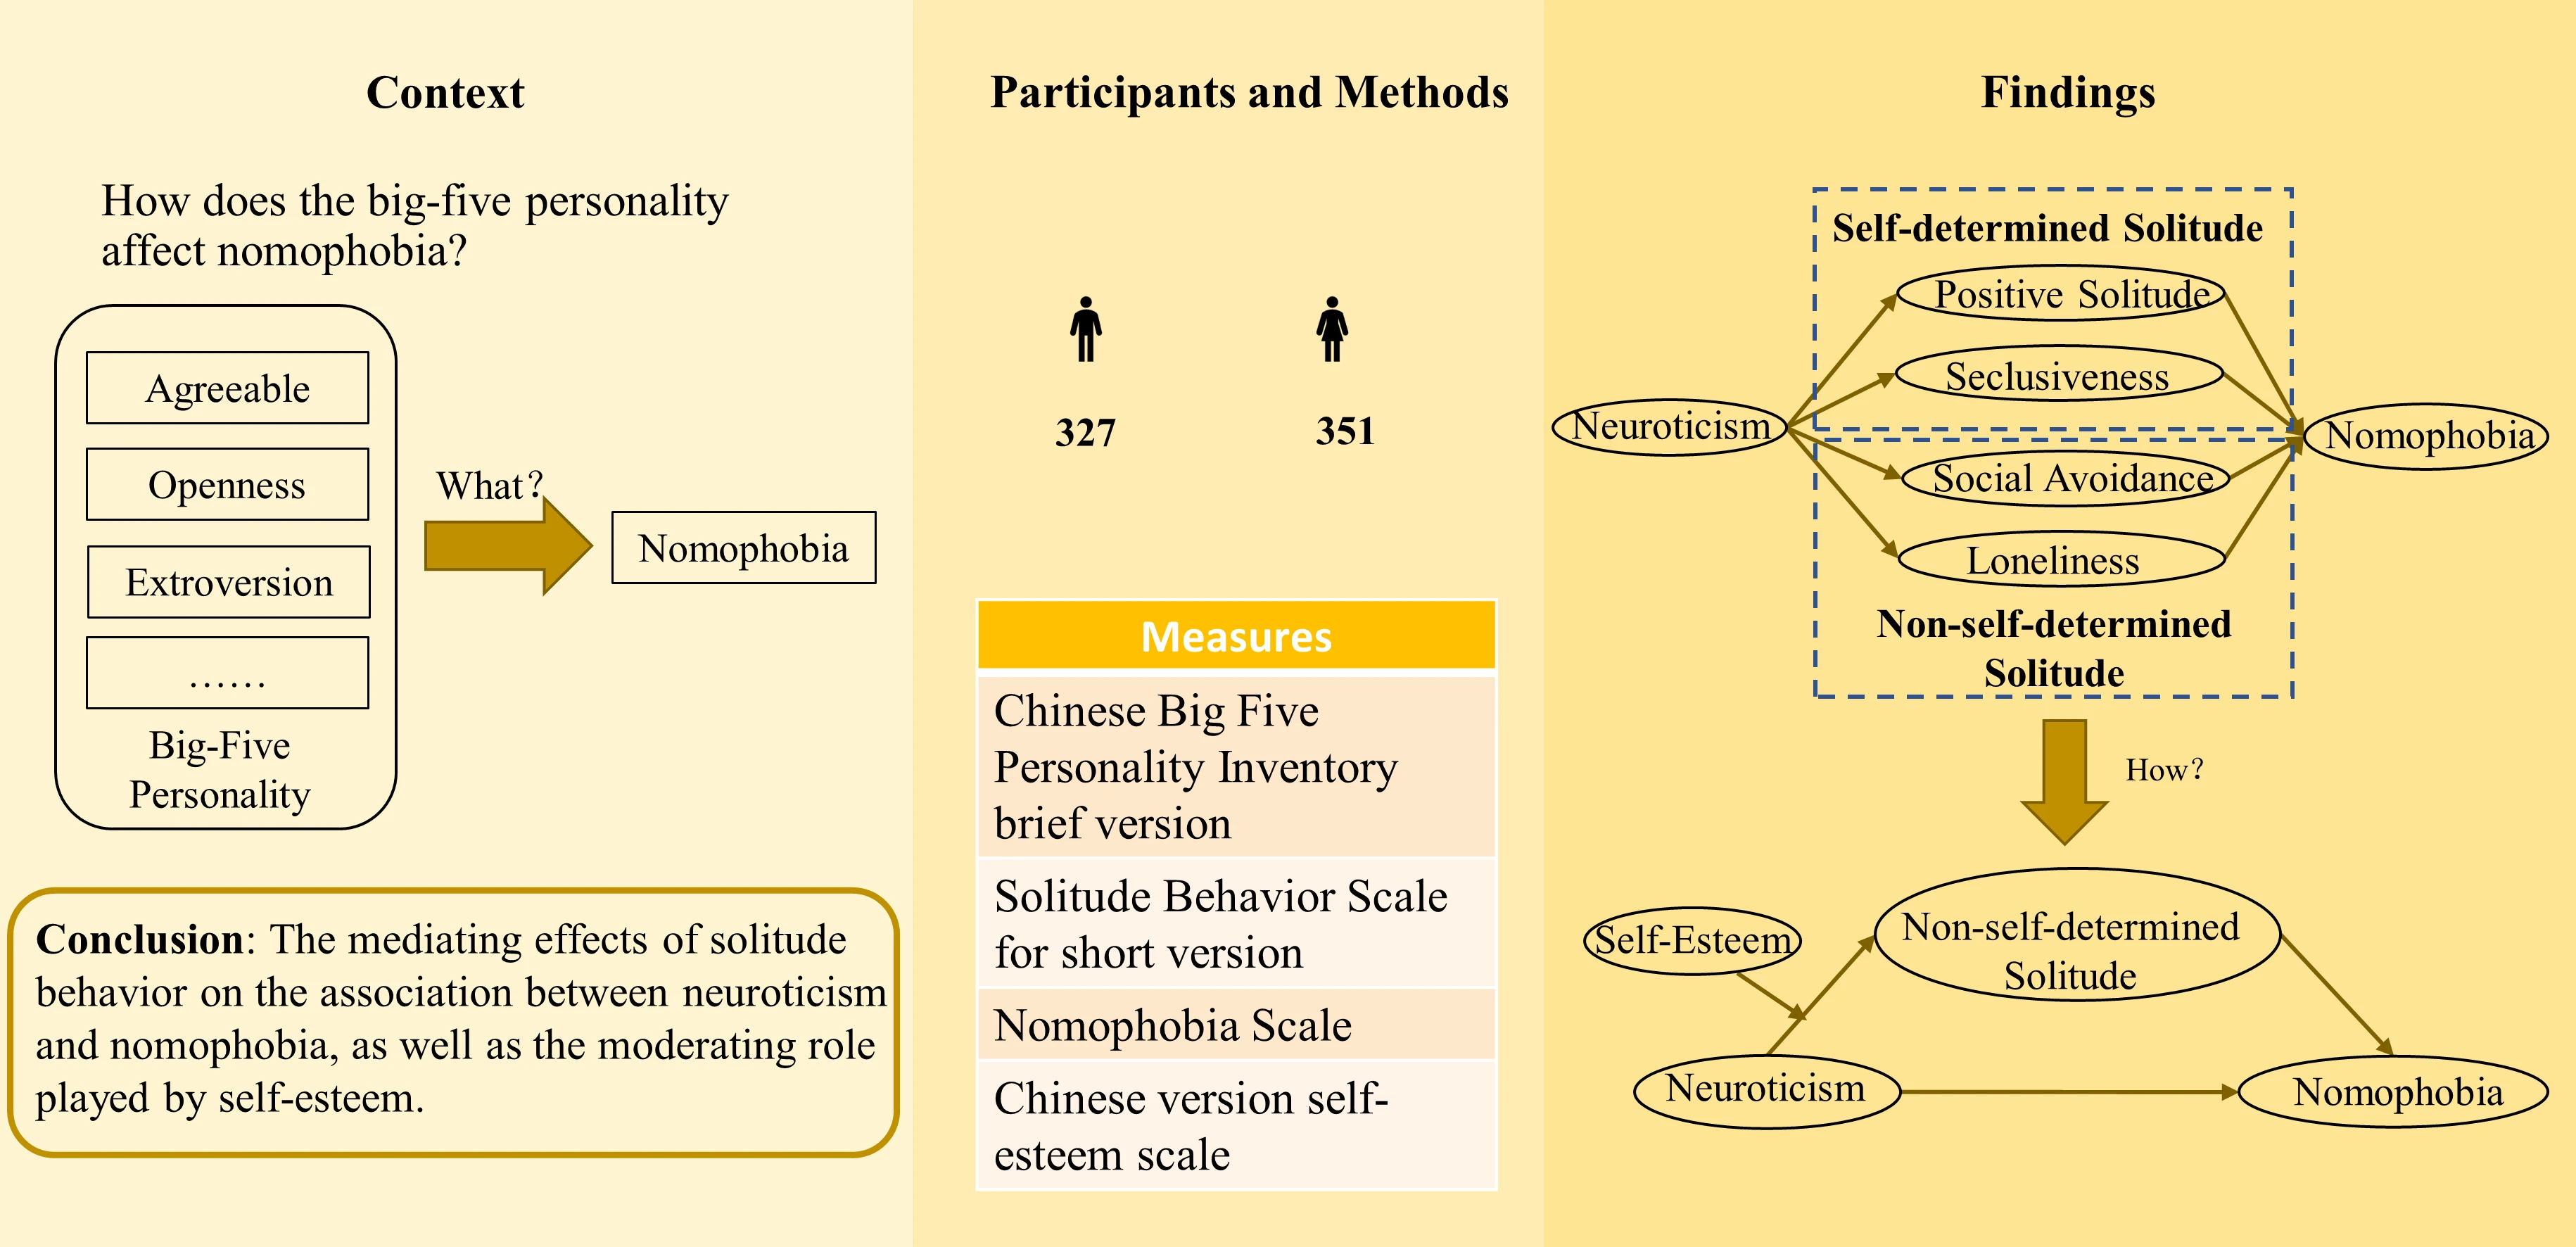 Personality and Nomophobia: A Moderated Mediation Model of Self-Esteem and Non-Self-Determined Solitude